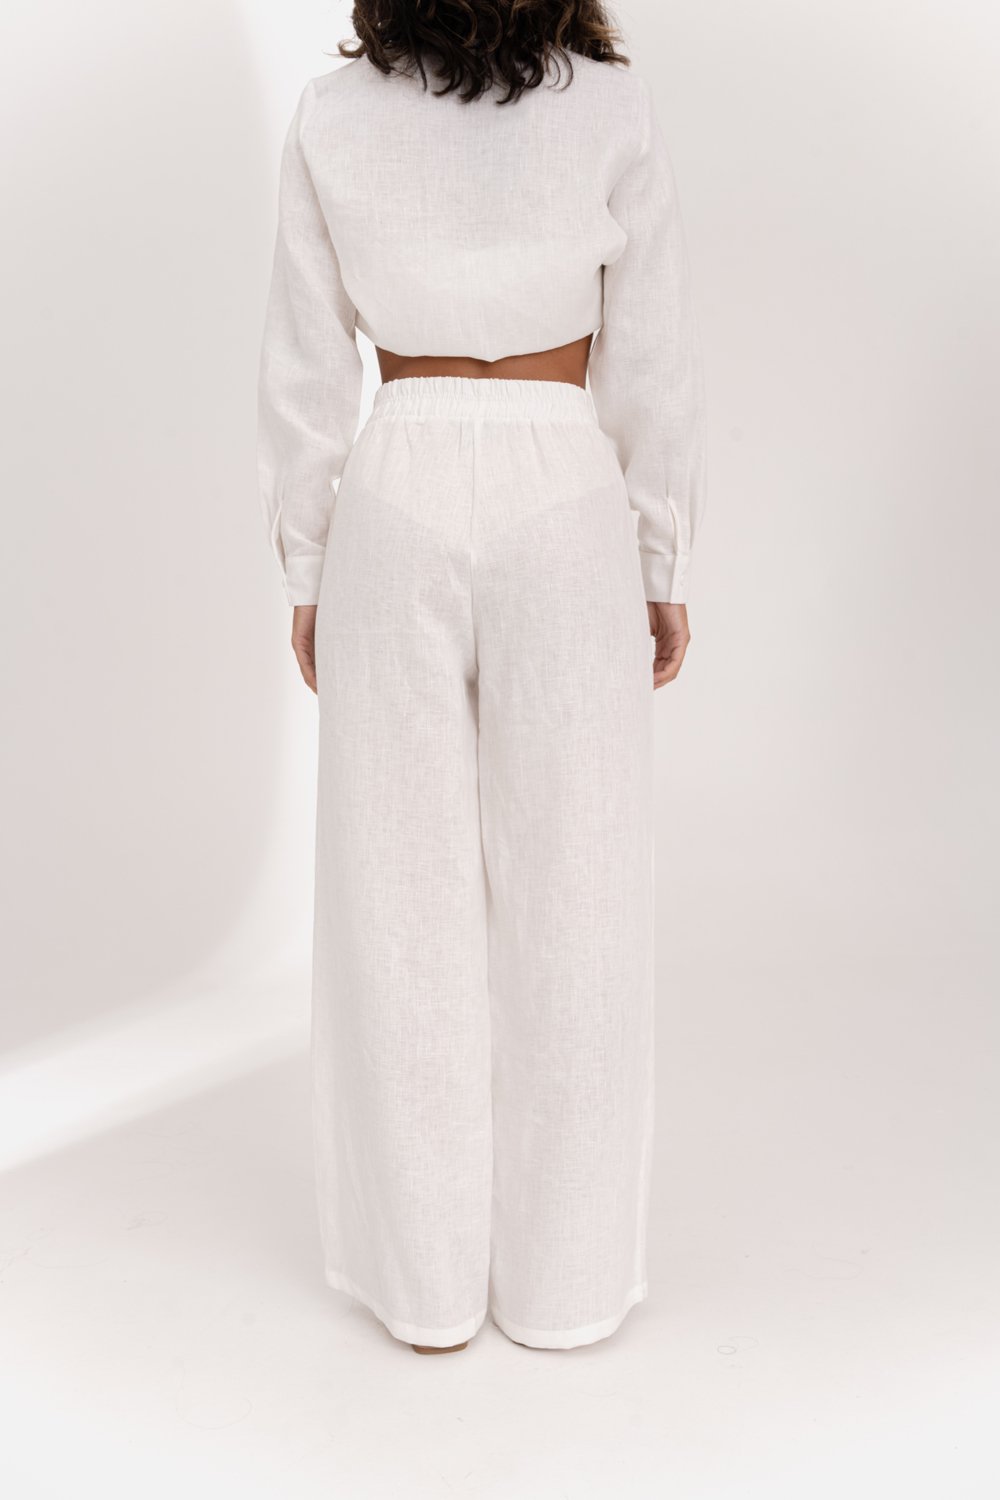 Milk linen trousers with elastic waistband